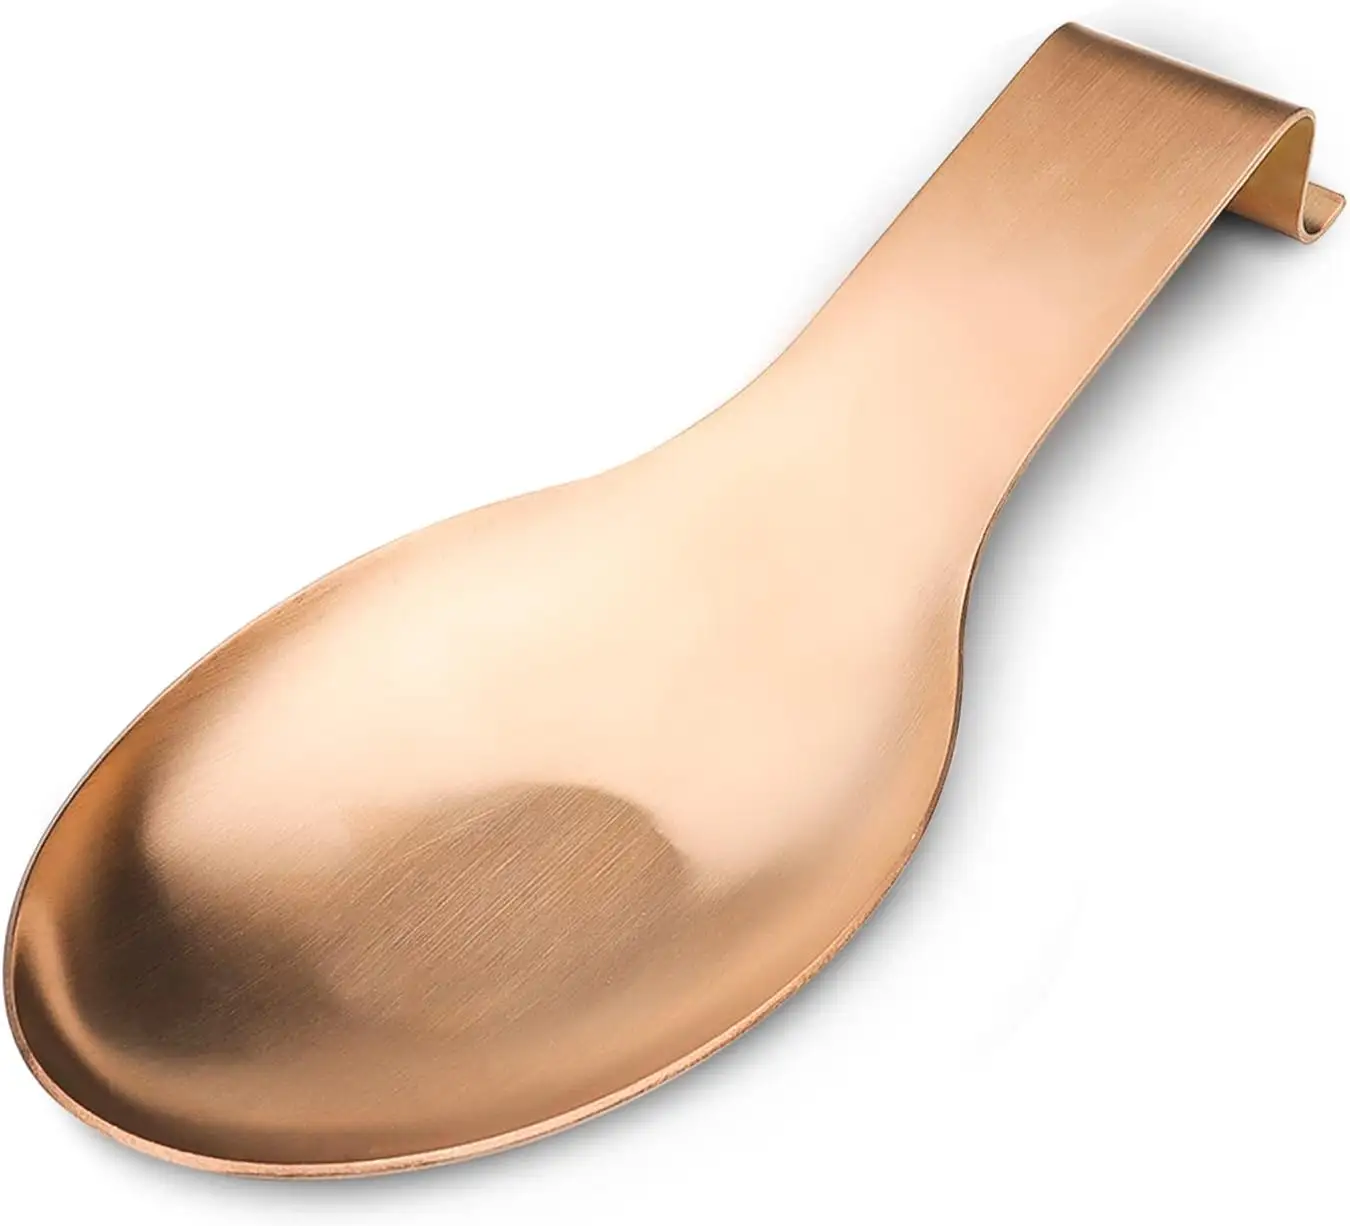 Metal Spoon Rest Perfect For Resting Large Or Small Spoons Ladles Spatulas Coffee Spoon Whisk Or Other Cooking Utensils